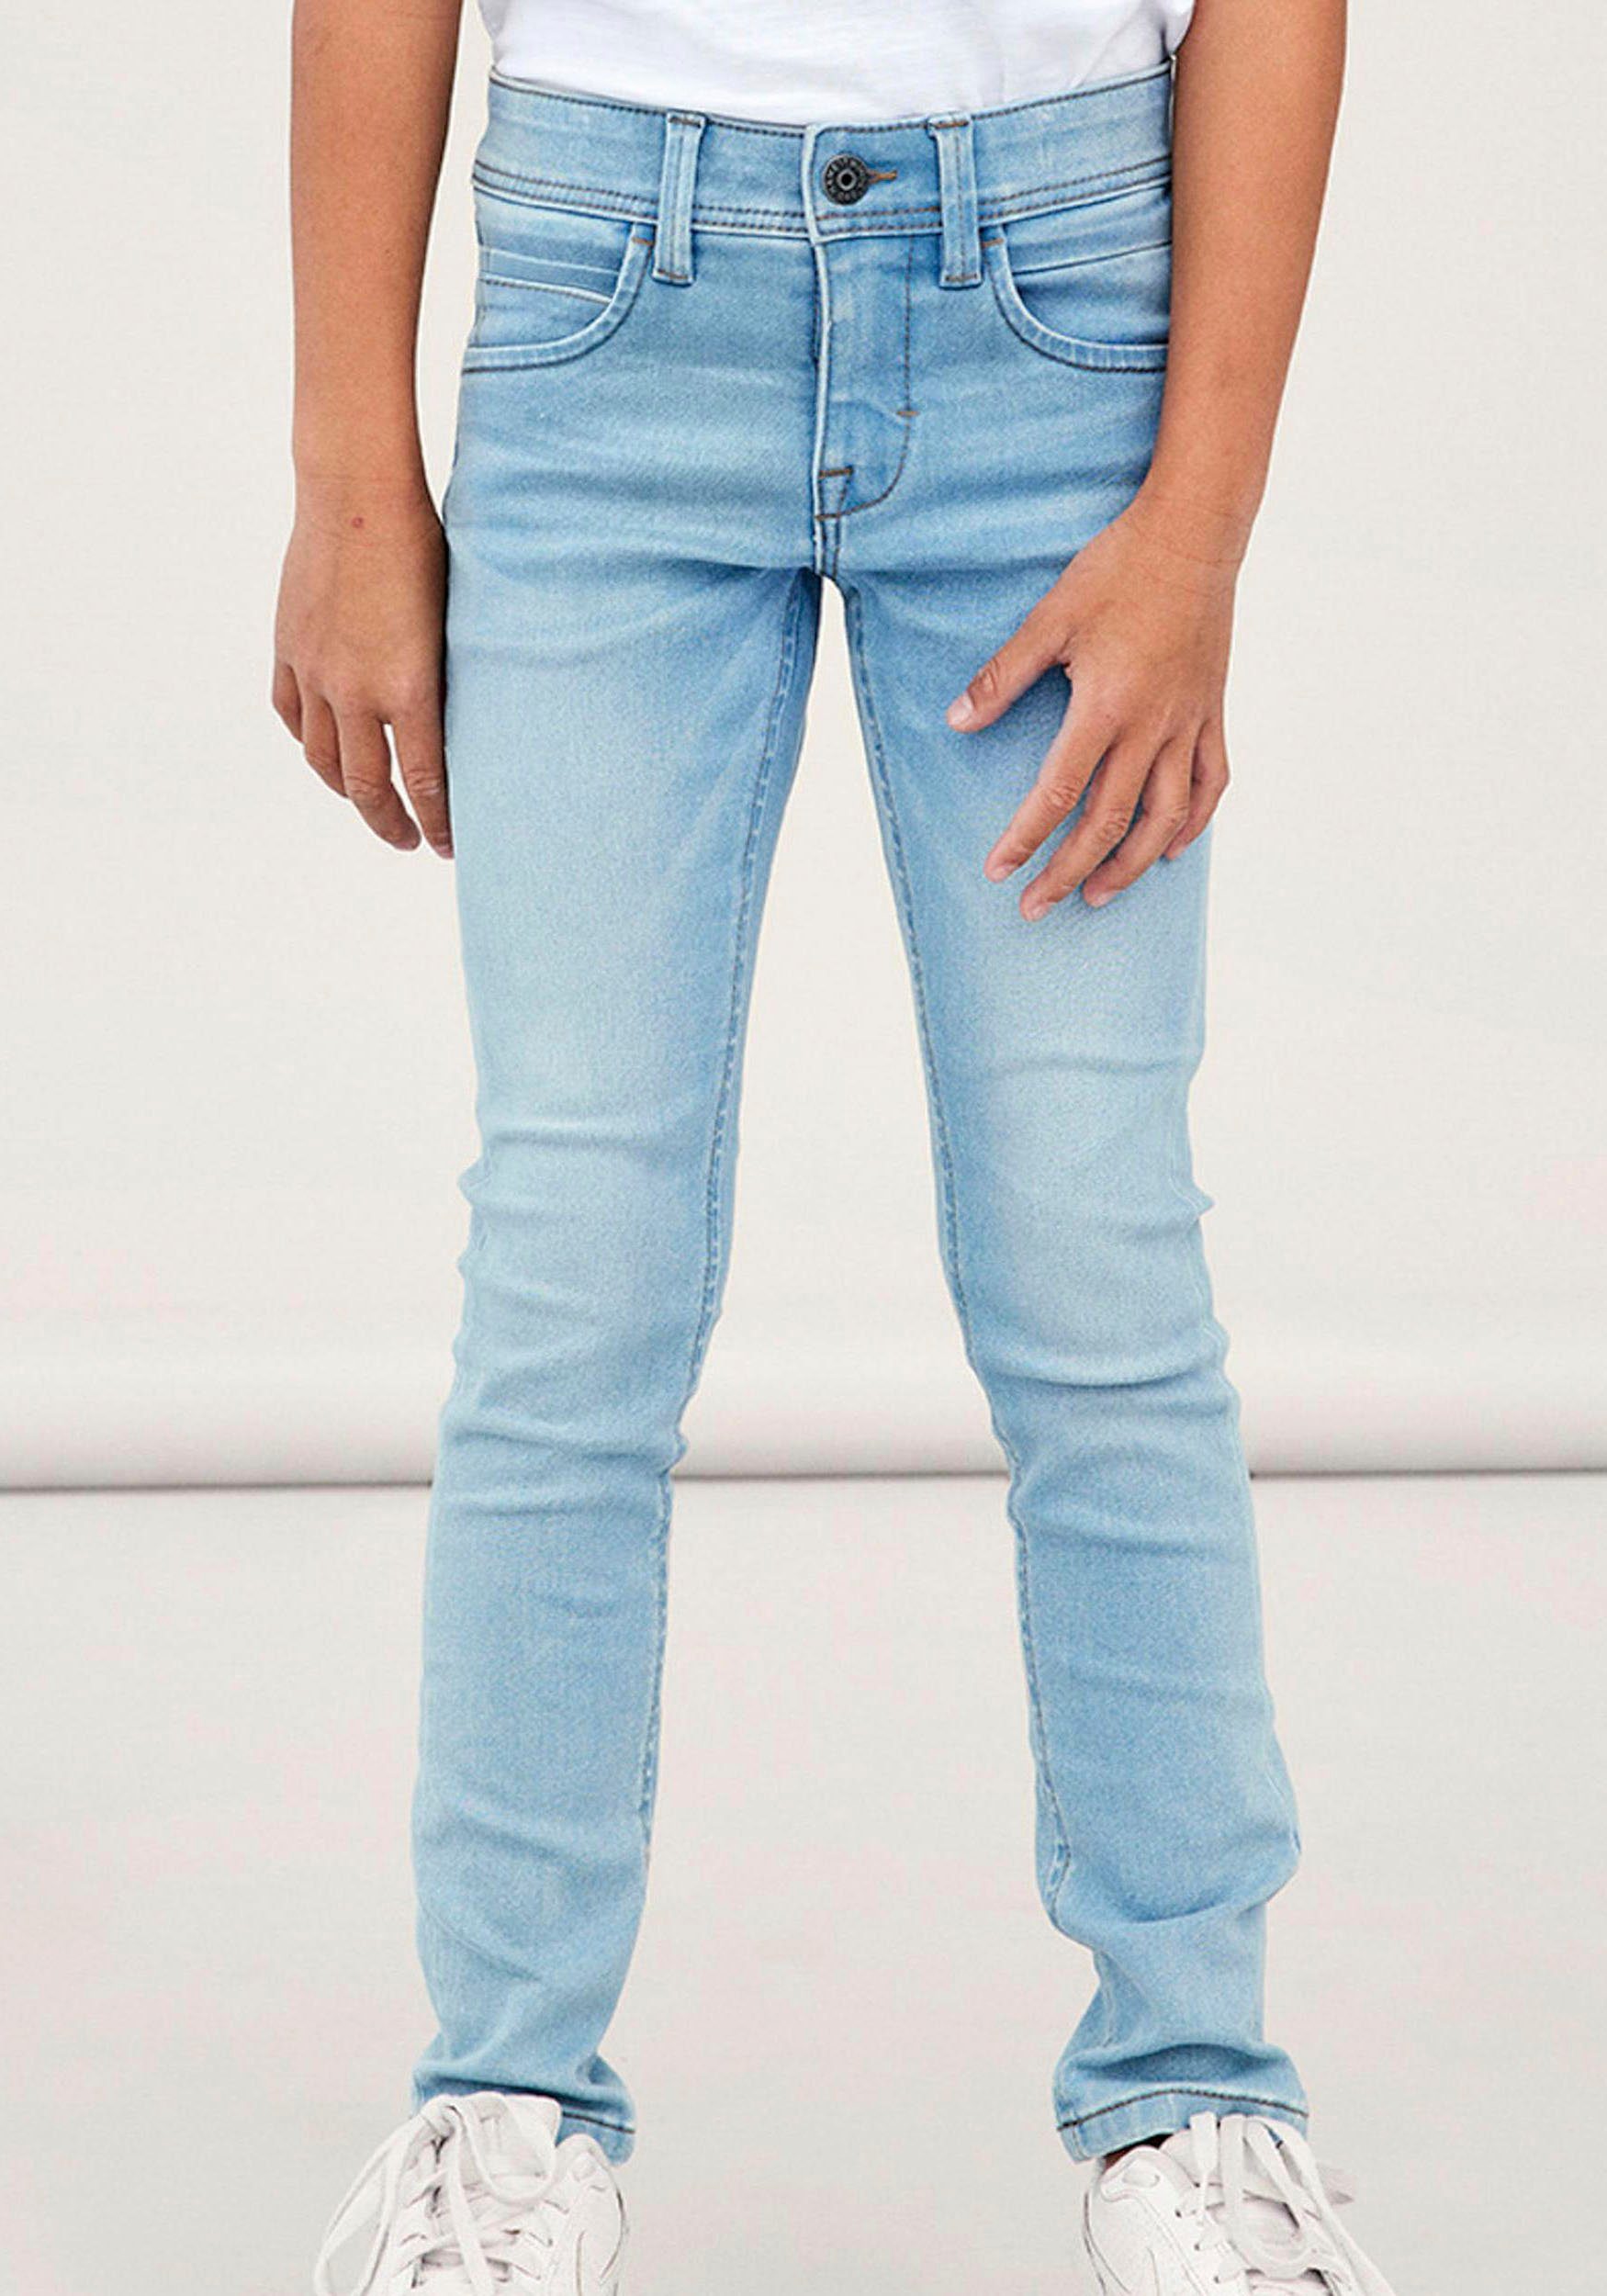 NKMSILAS It in Name DNMTAX Stretch-Jeans Lässige Waschung 5-Pocket-Form authentischer PANT,